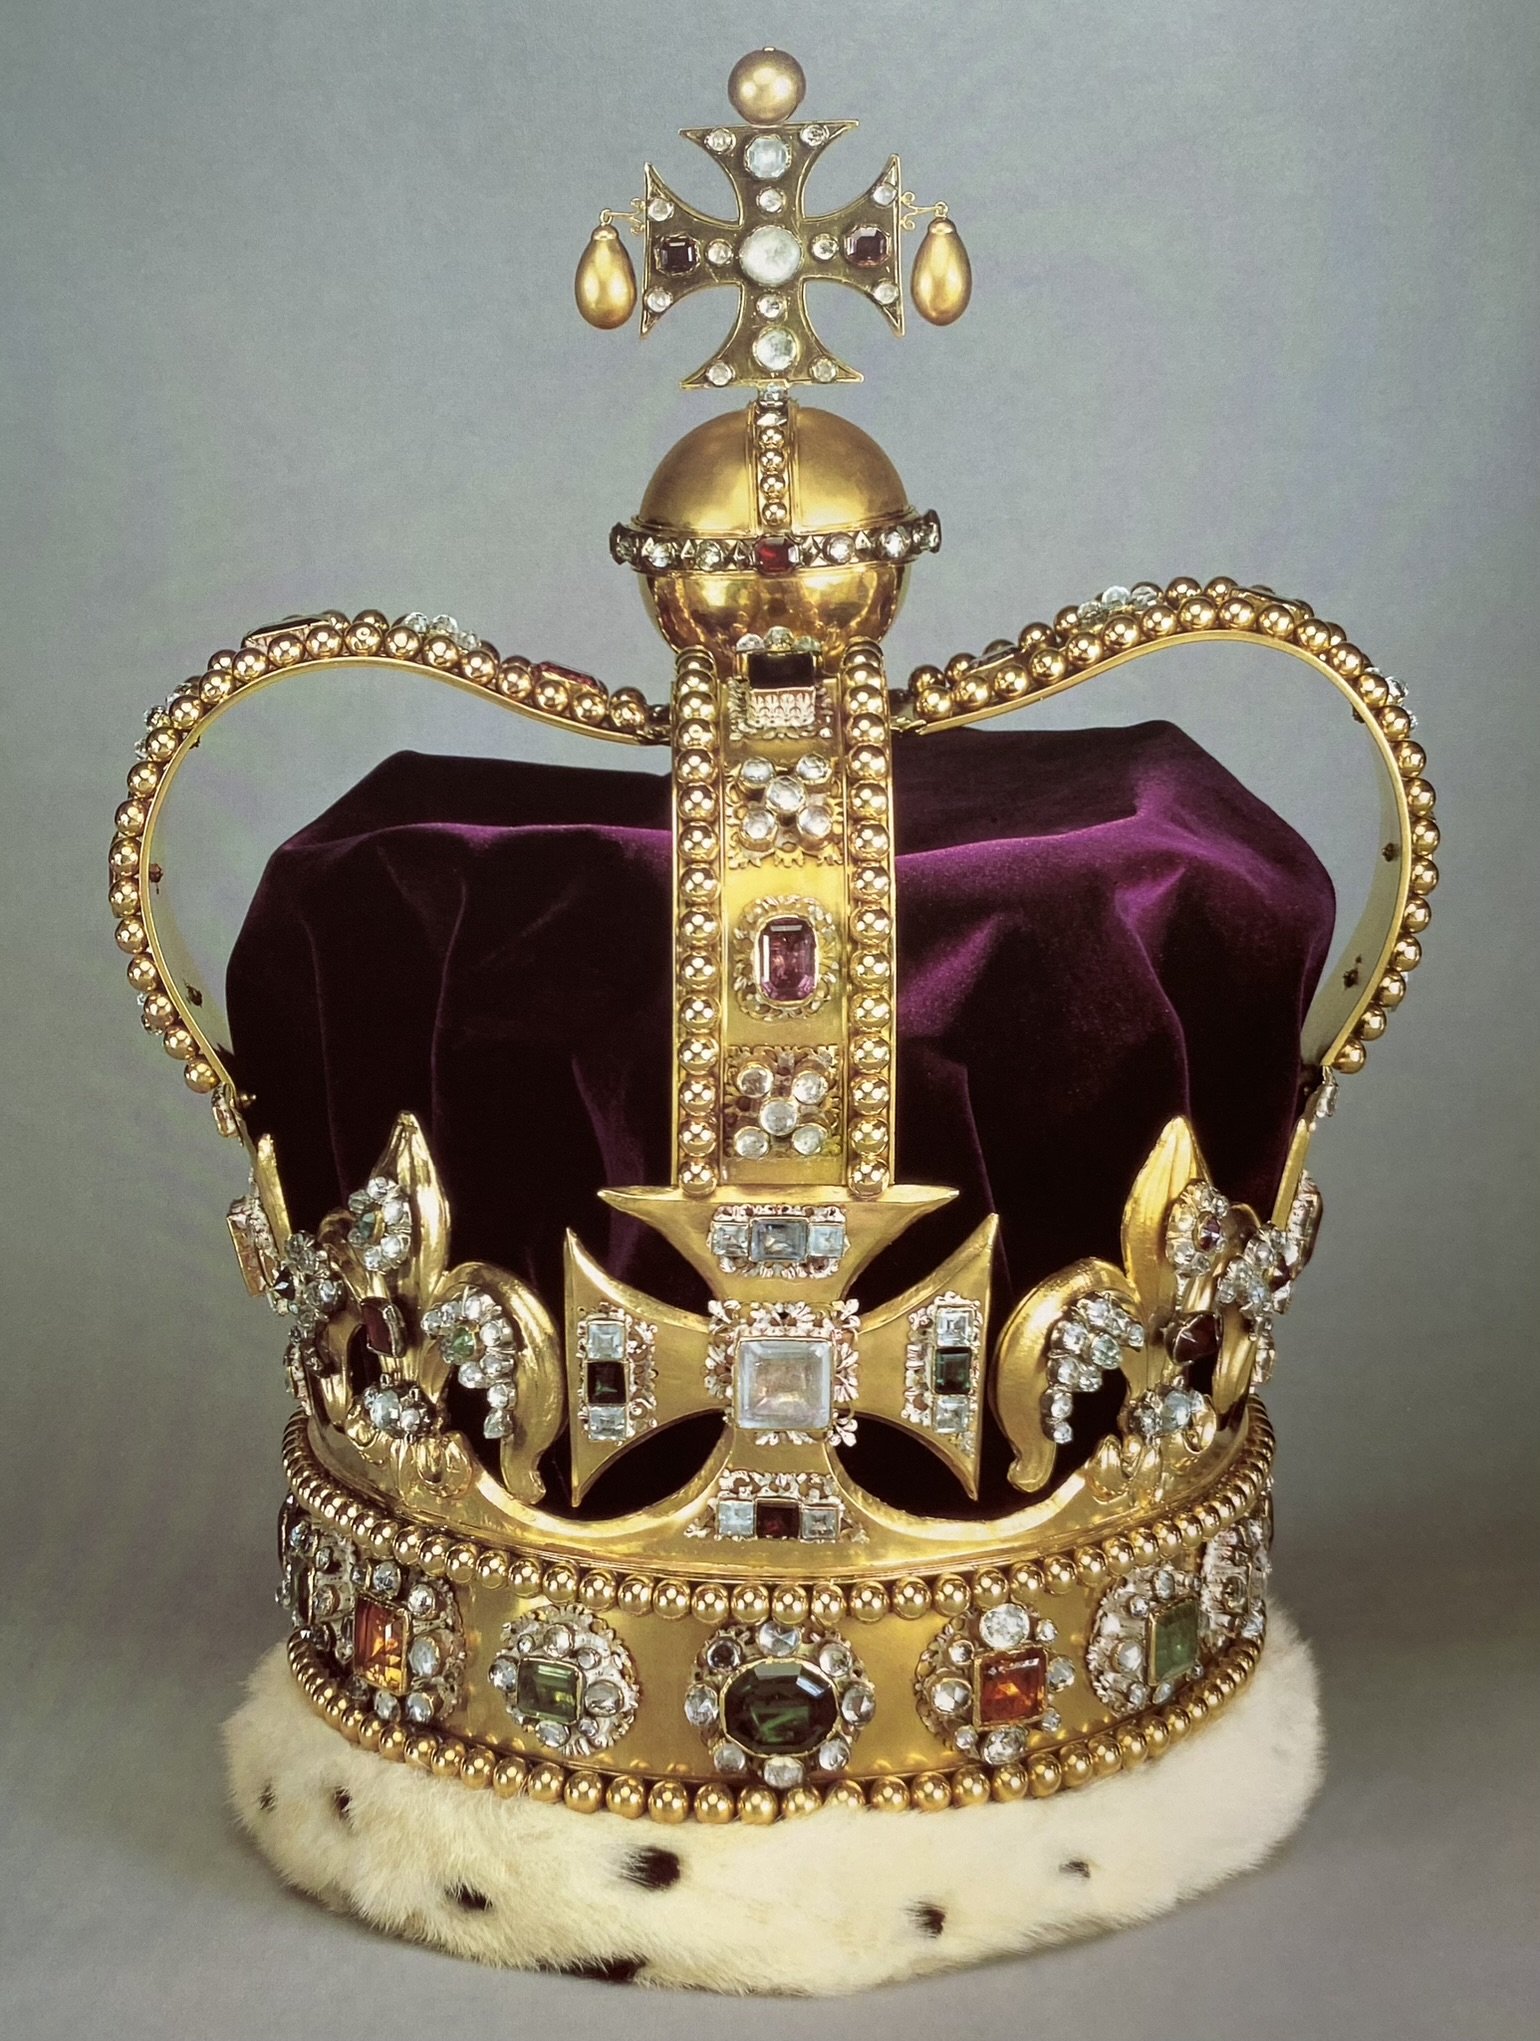 St. Edward's Crown made of solid gold, with removable gems.